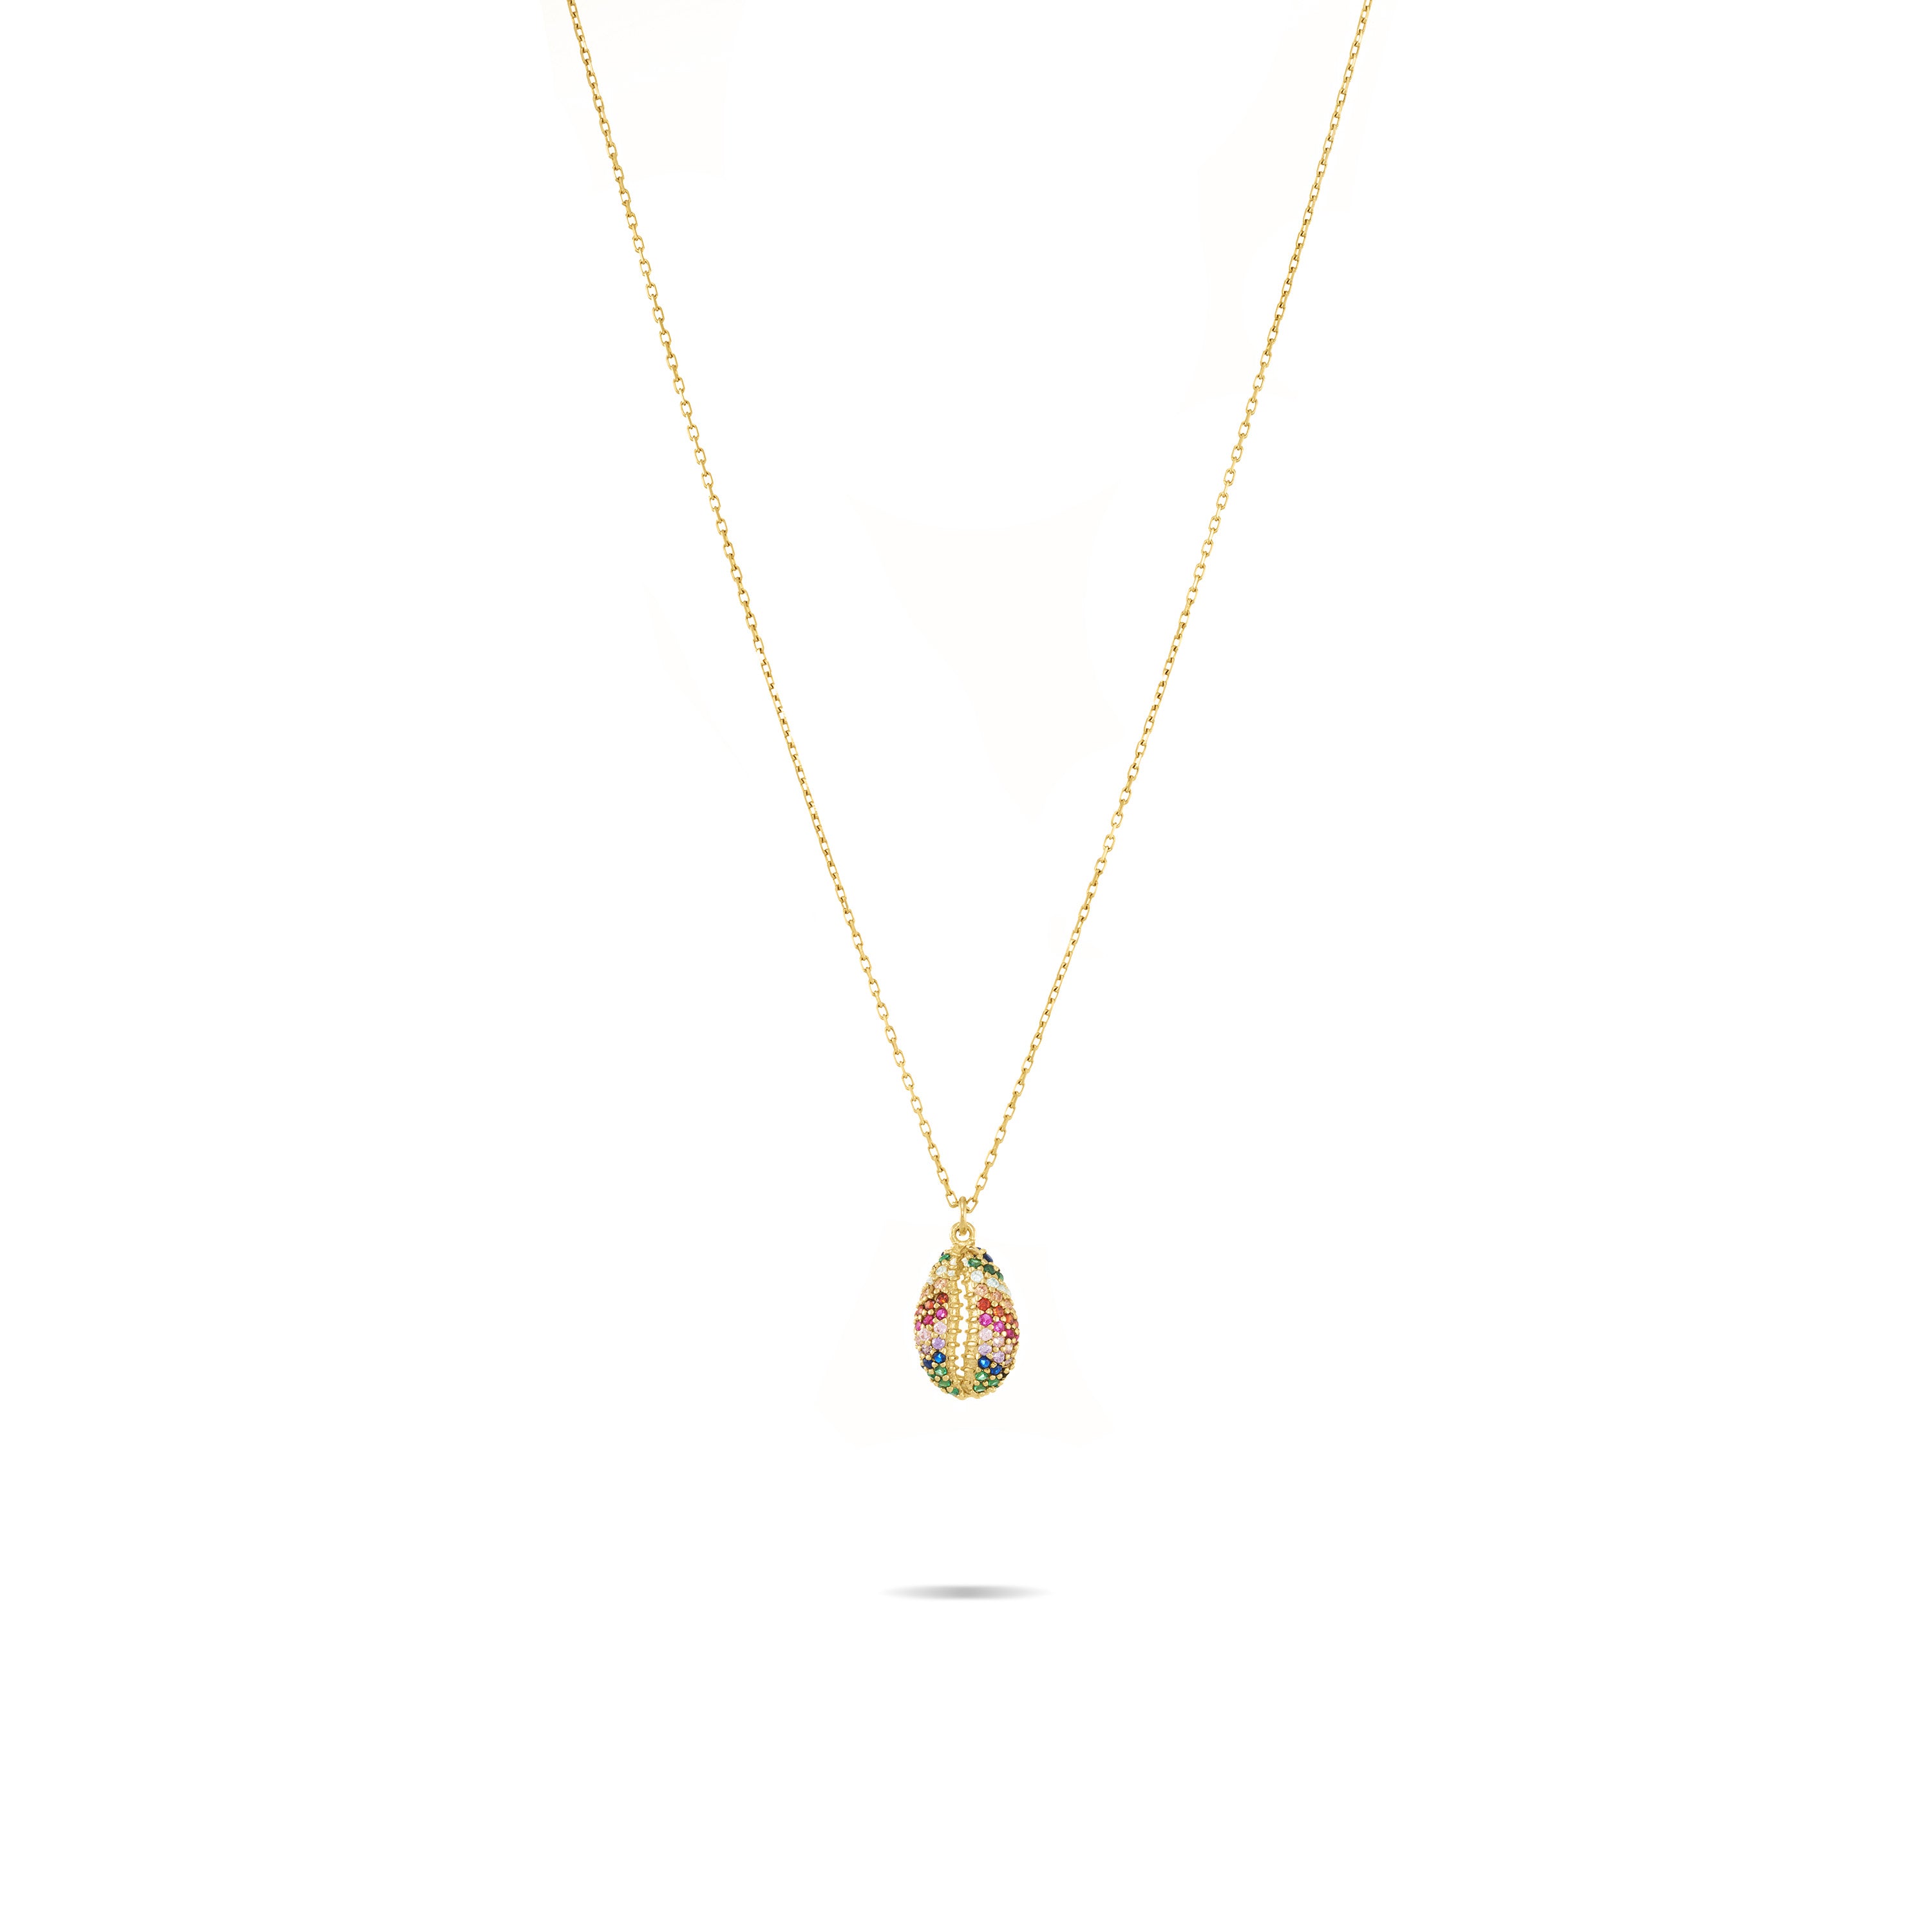 Cubic Zirconia Paved Seashell Chain Necklace